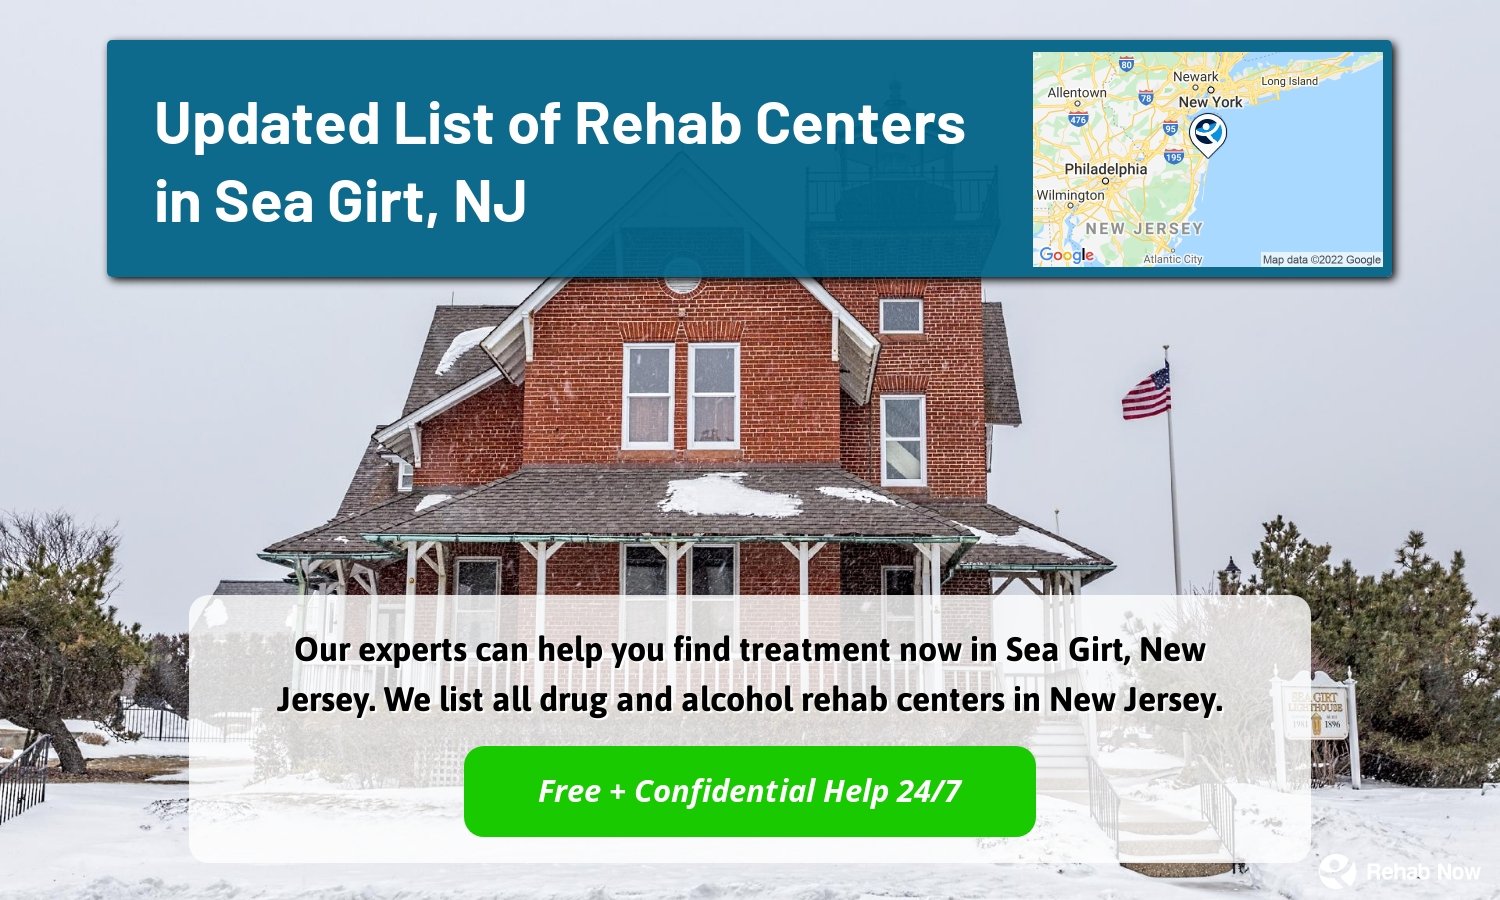 Our experts can help you find treatment now in Sea Girt, New Jersey. We list all drug and alcohol rehab centers in New Jersey.